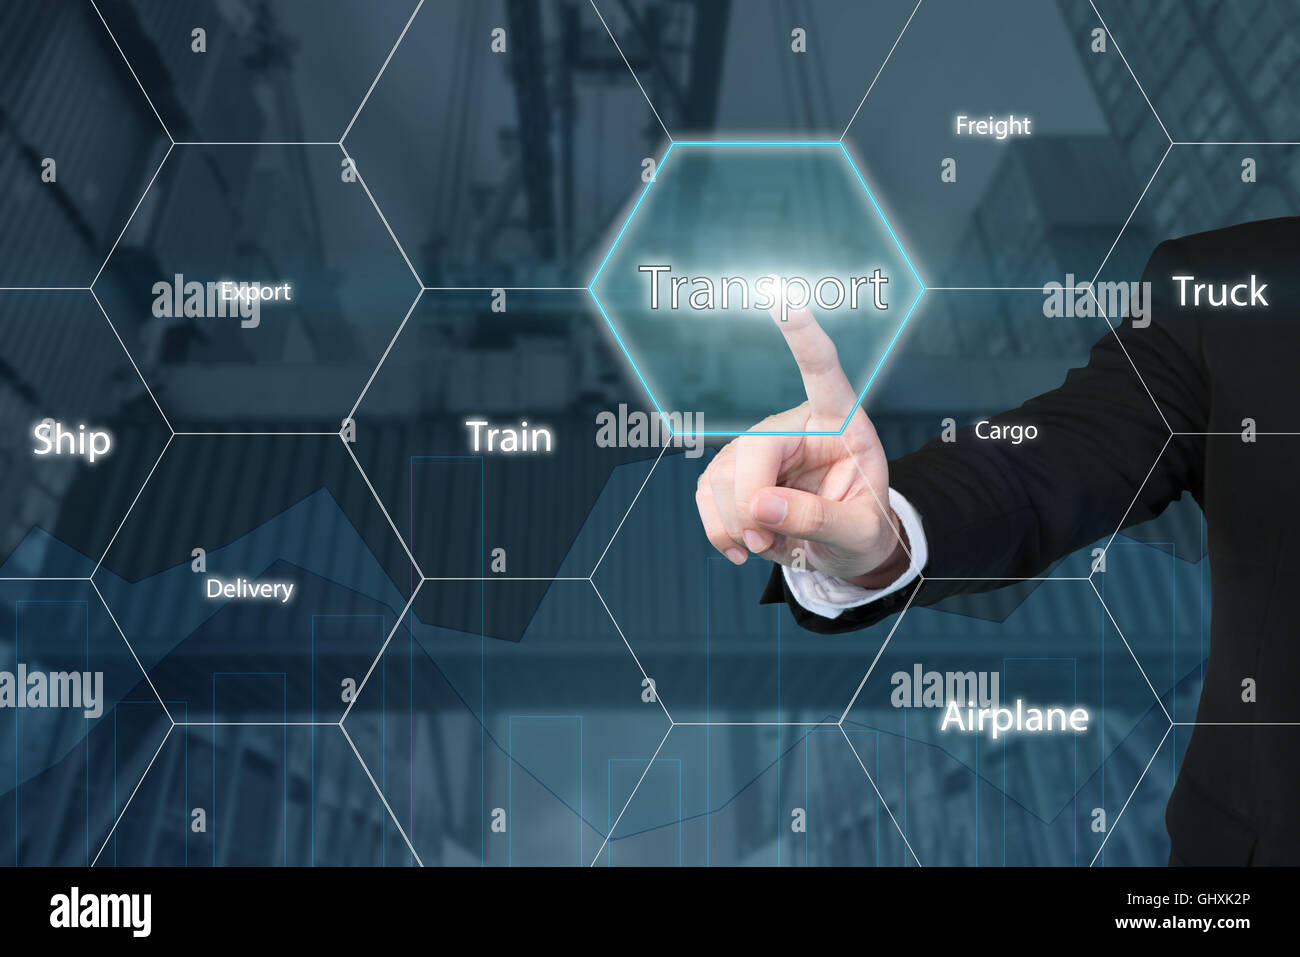 Business technology concept - Business man touching transport icon with business success virtual screen use for logistic,import, Stock Photo